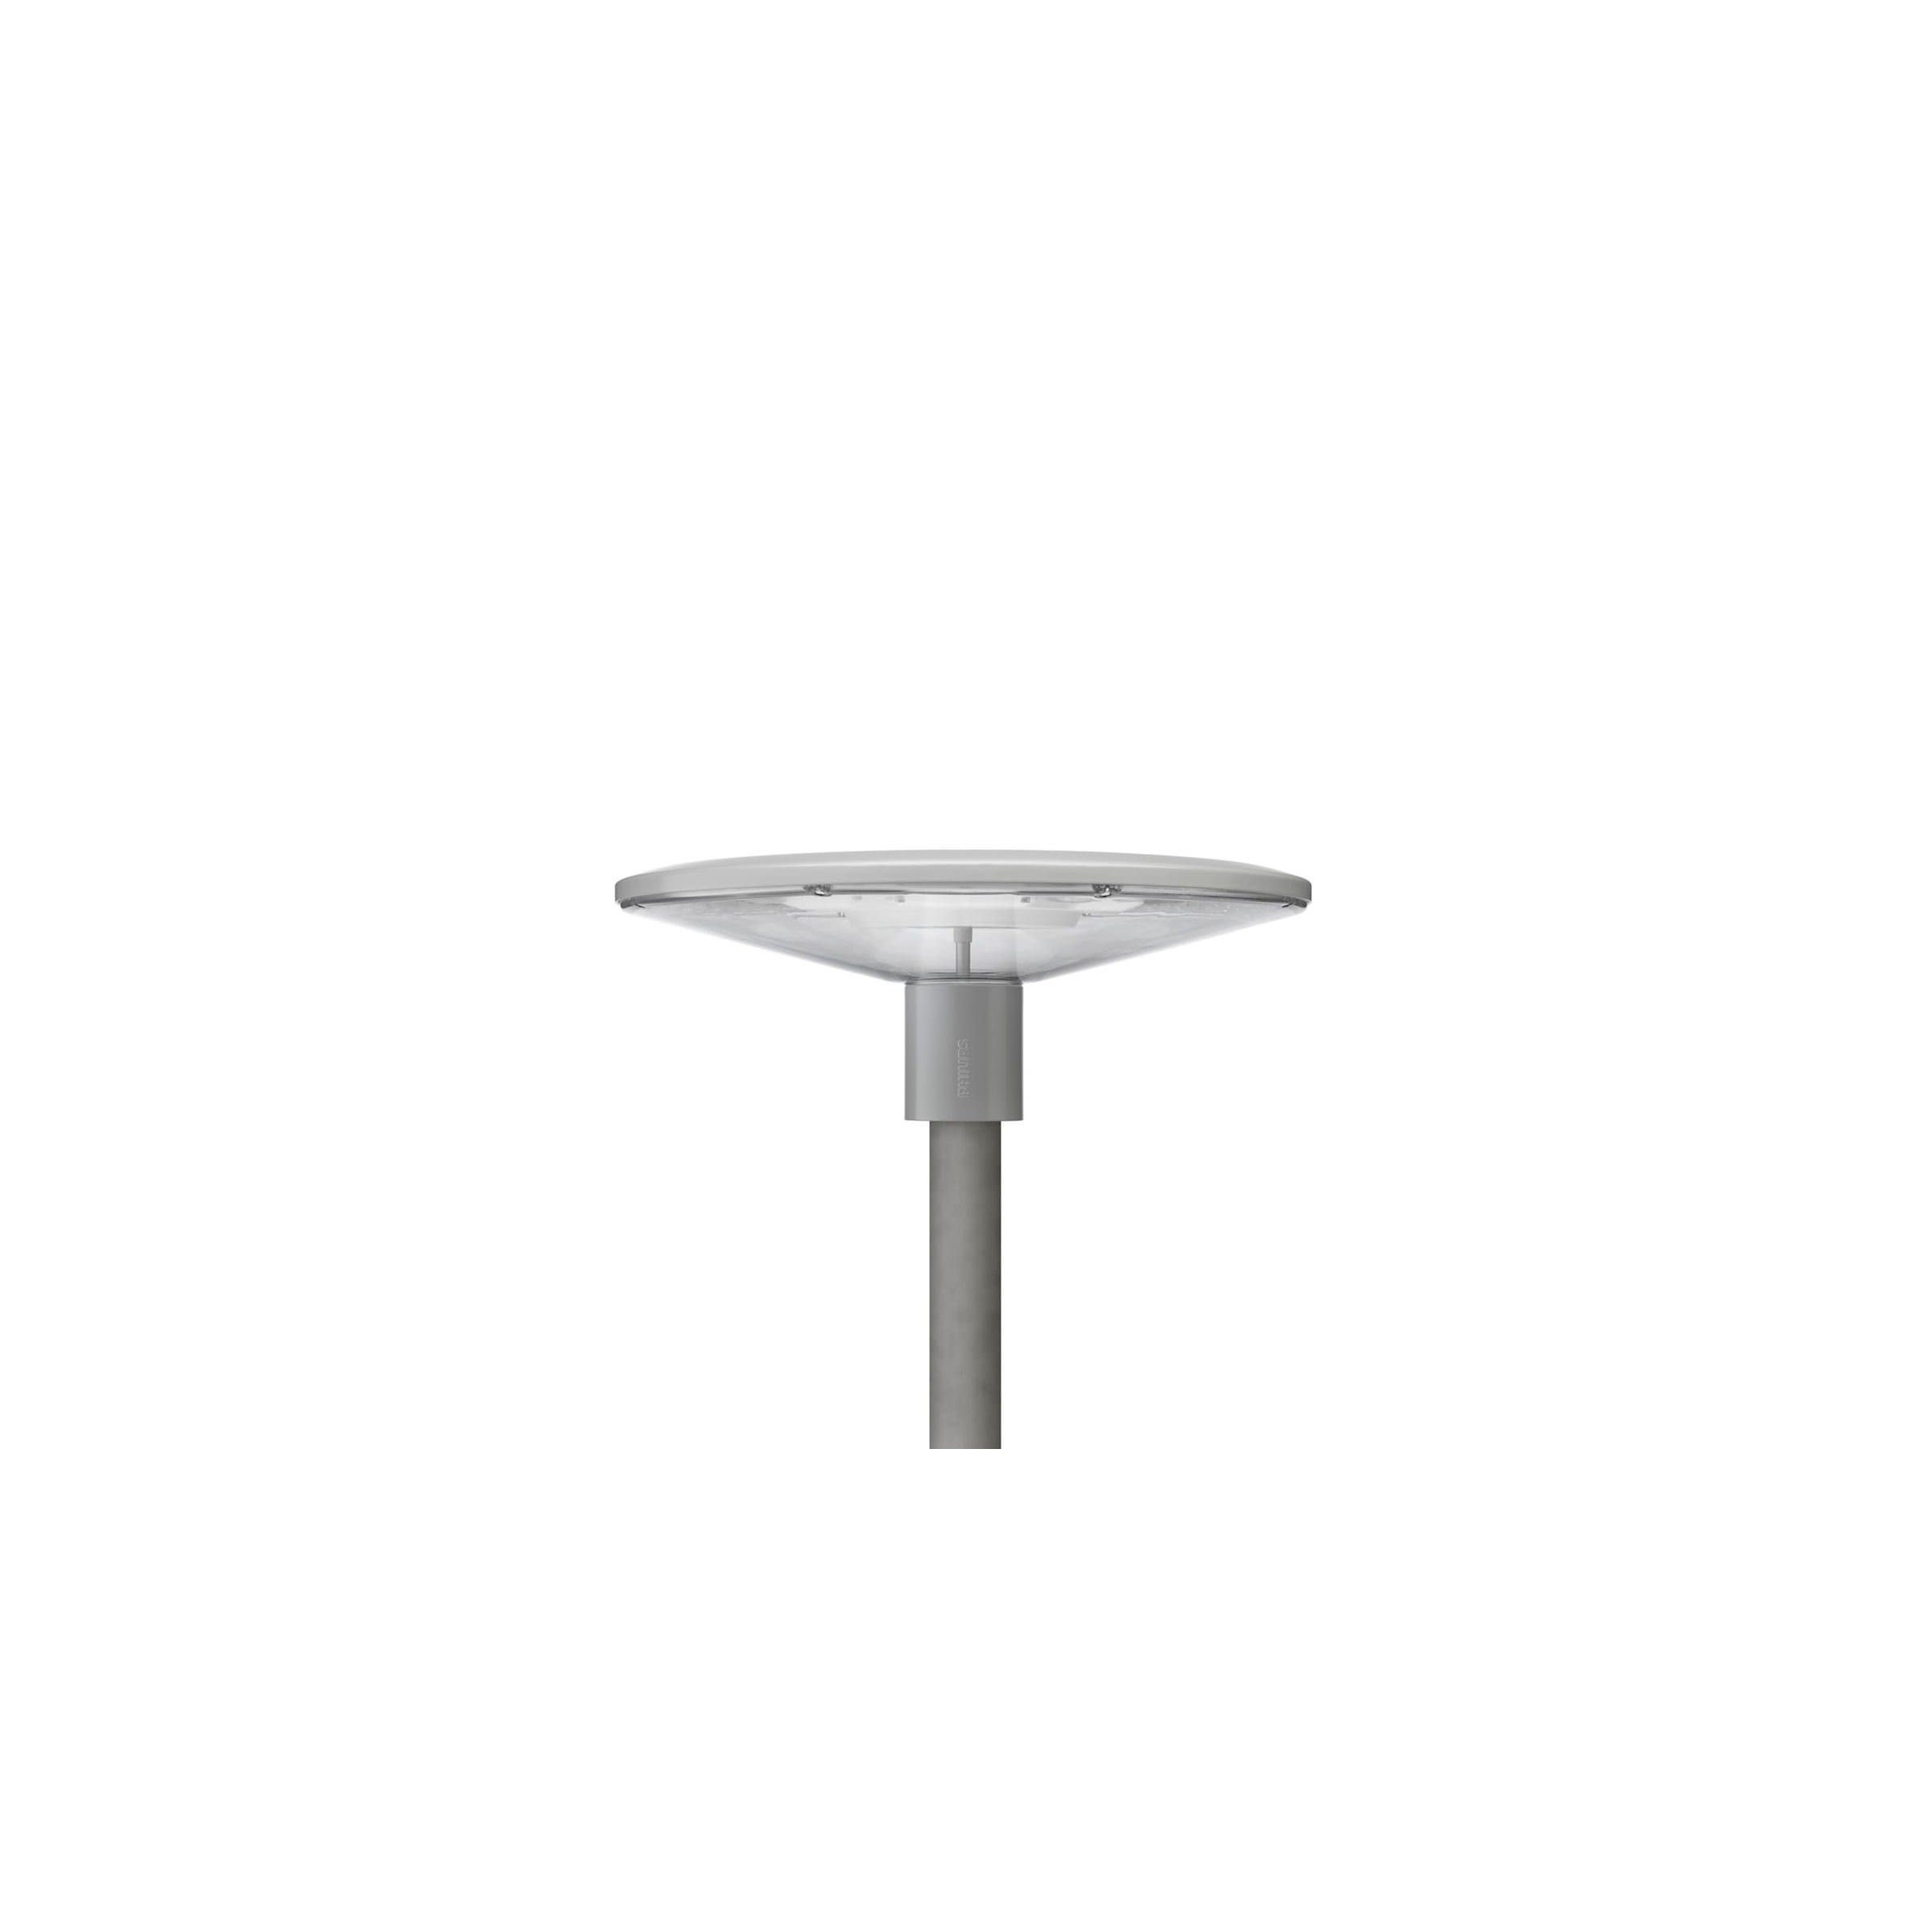 Philips - TownGuide LED Cone Plat Clair 62P  BDP100 830 DW 49,5W 7000lm IP66 IK10 100 000h